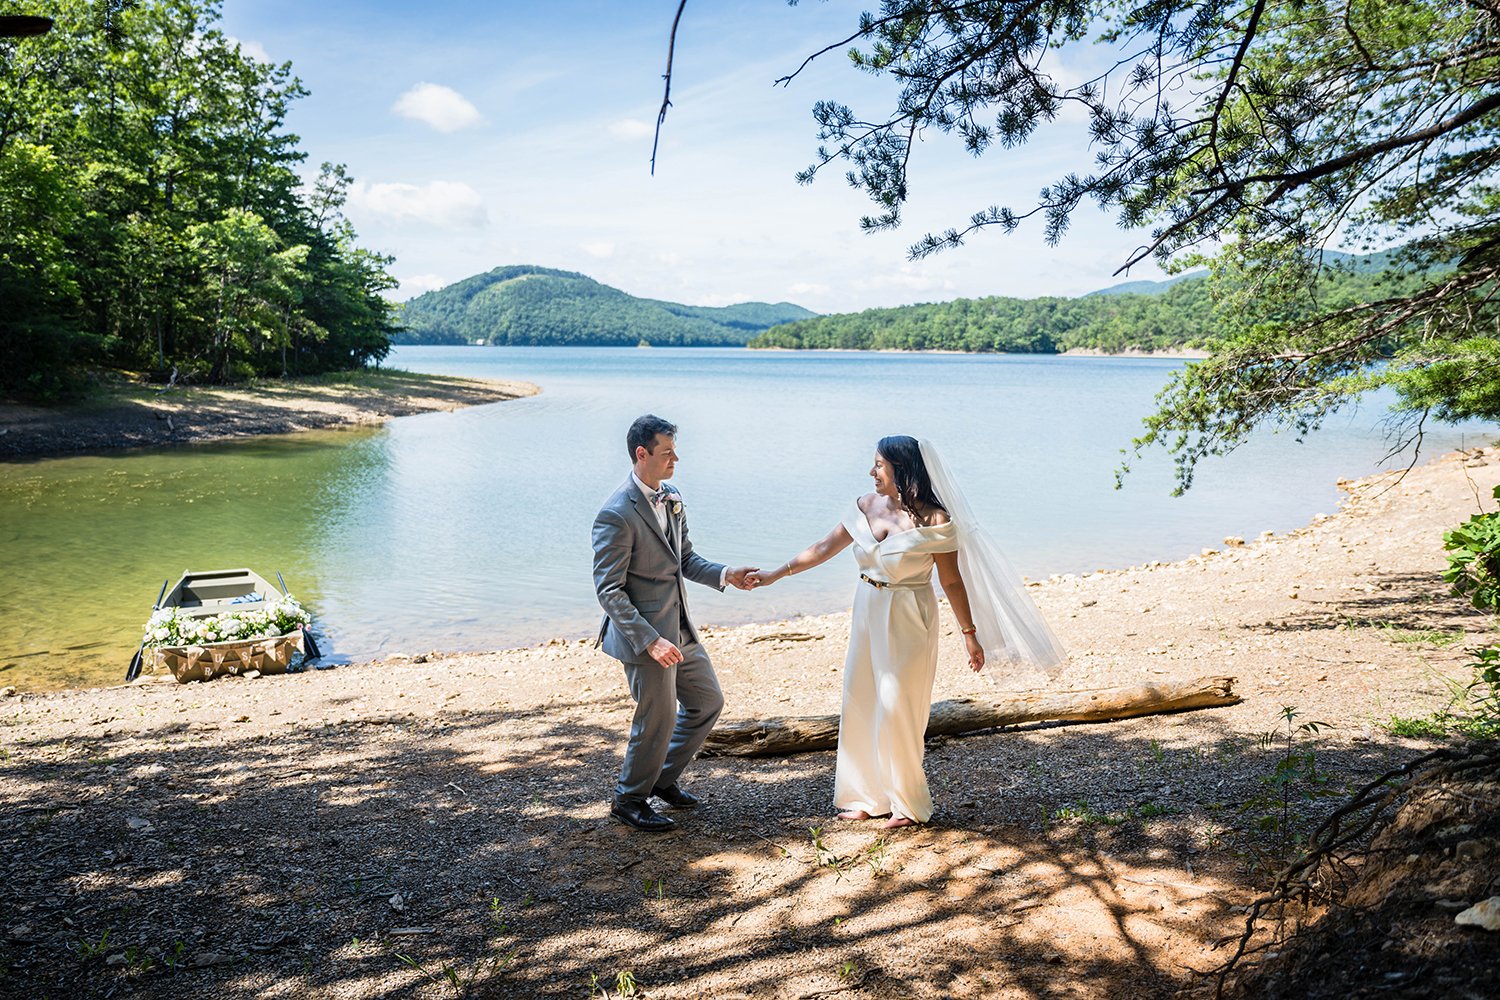 A bride and groom take their first dance on the sandy and rocky shores of Carvin's Cove near Roanoke, Virginia with their rowboat adorned with flowers in the background.